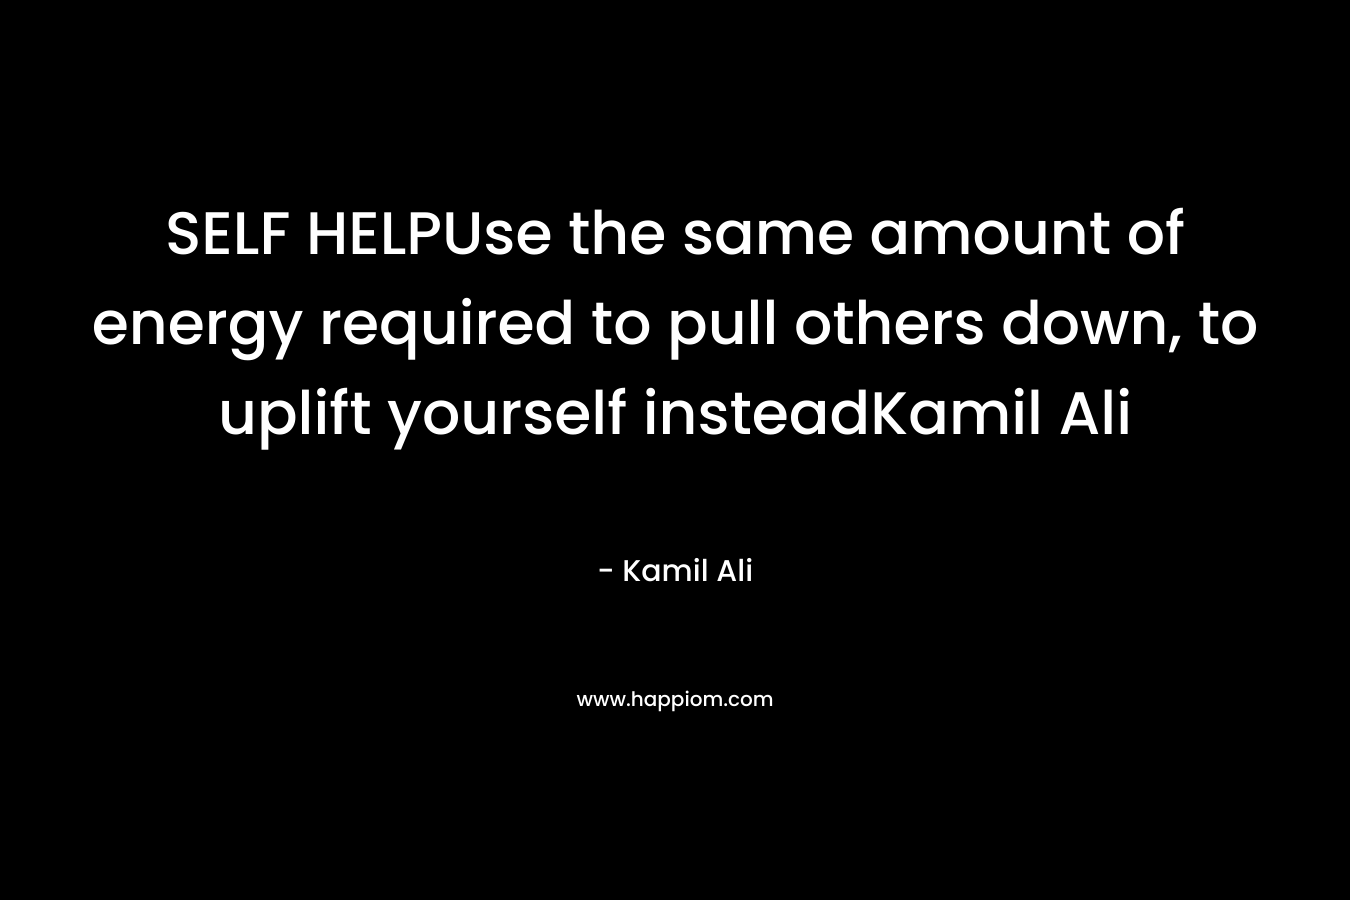 SELF HELPUse the same amount of energy required to pull others down, to uplift yourself insteadKamil Ali